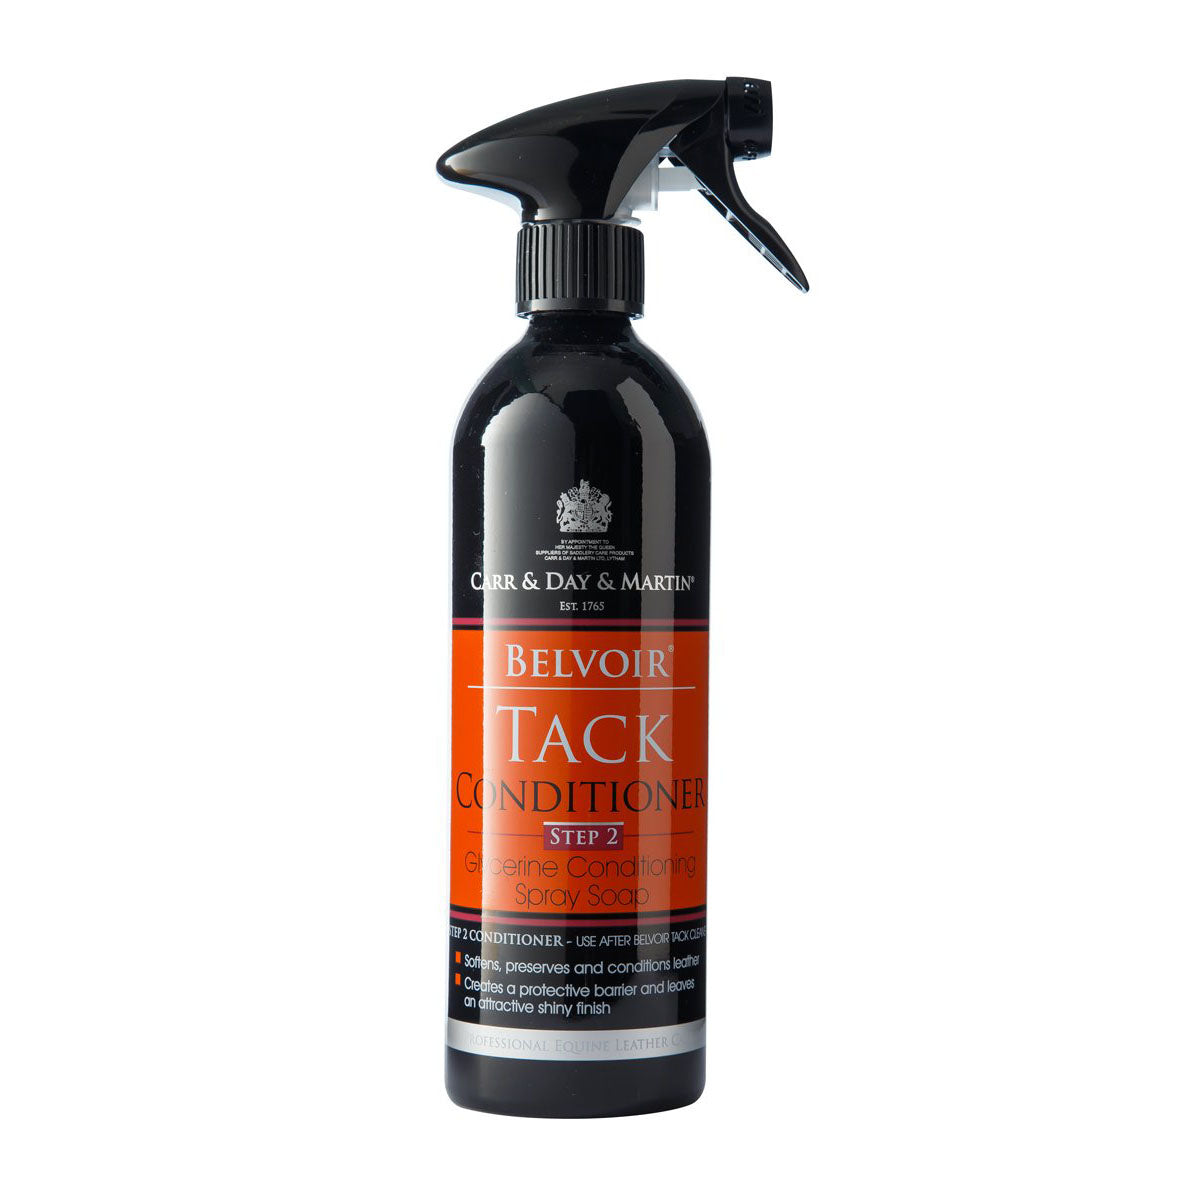 Carr & Day & Martin Belvoir Leather Tack Conditioning Spray